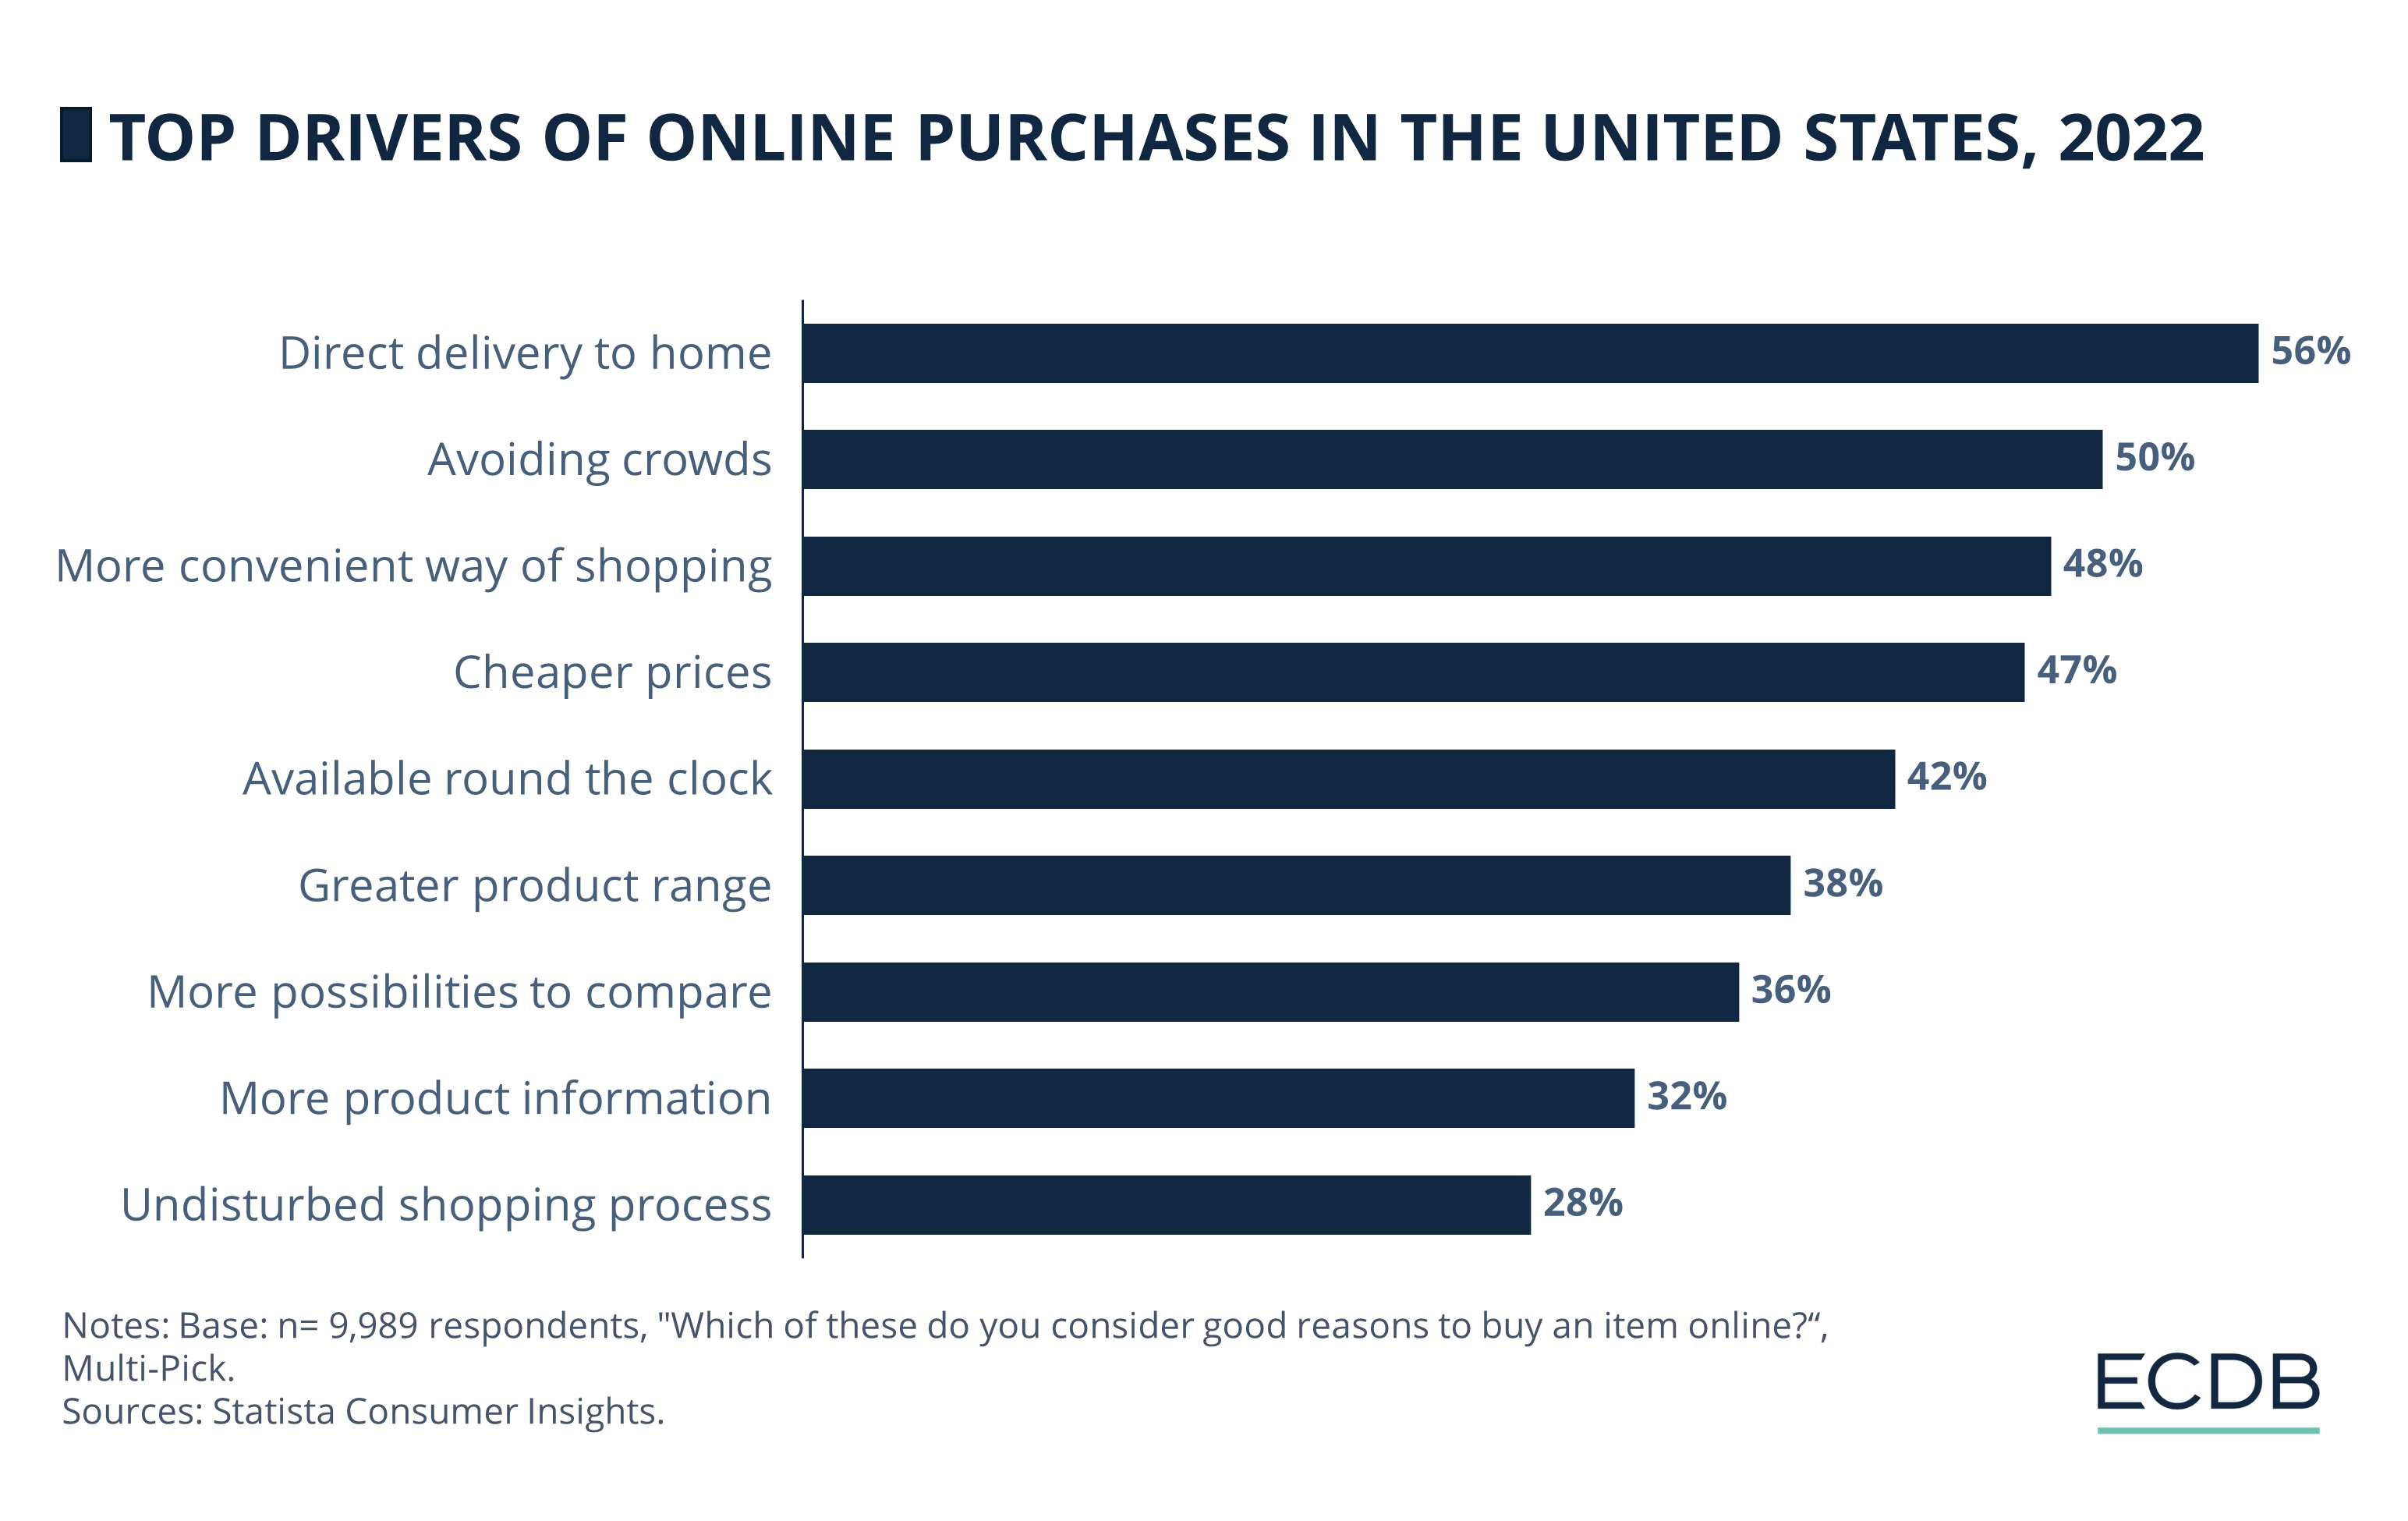 Top Drivers of Online Purchases in the United States, 2022